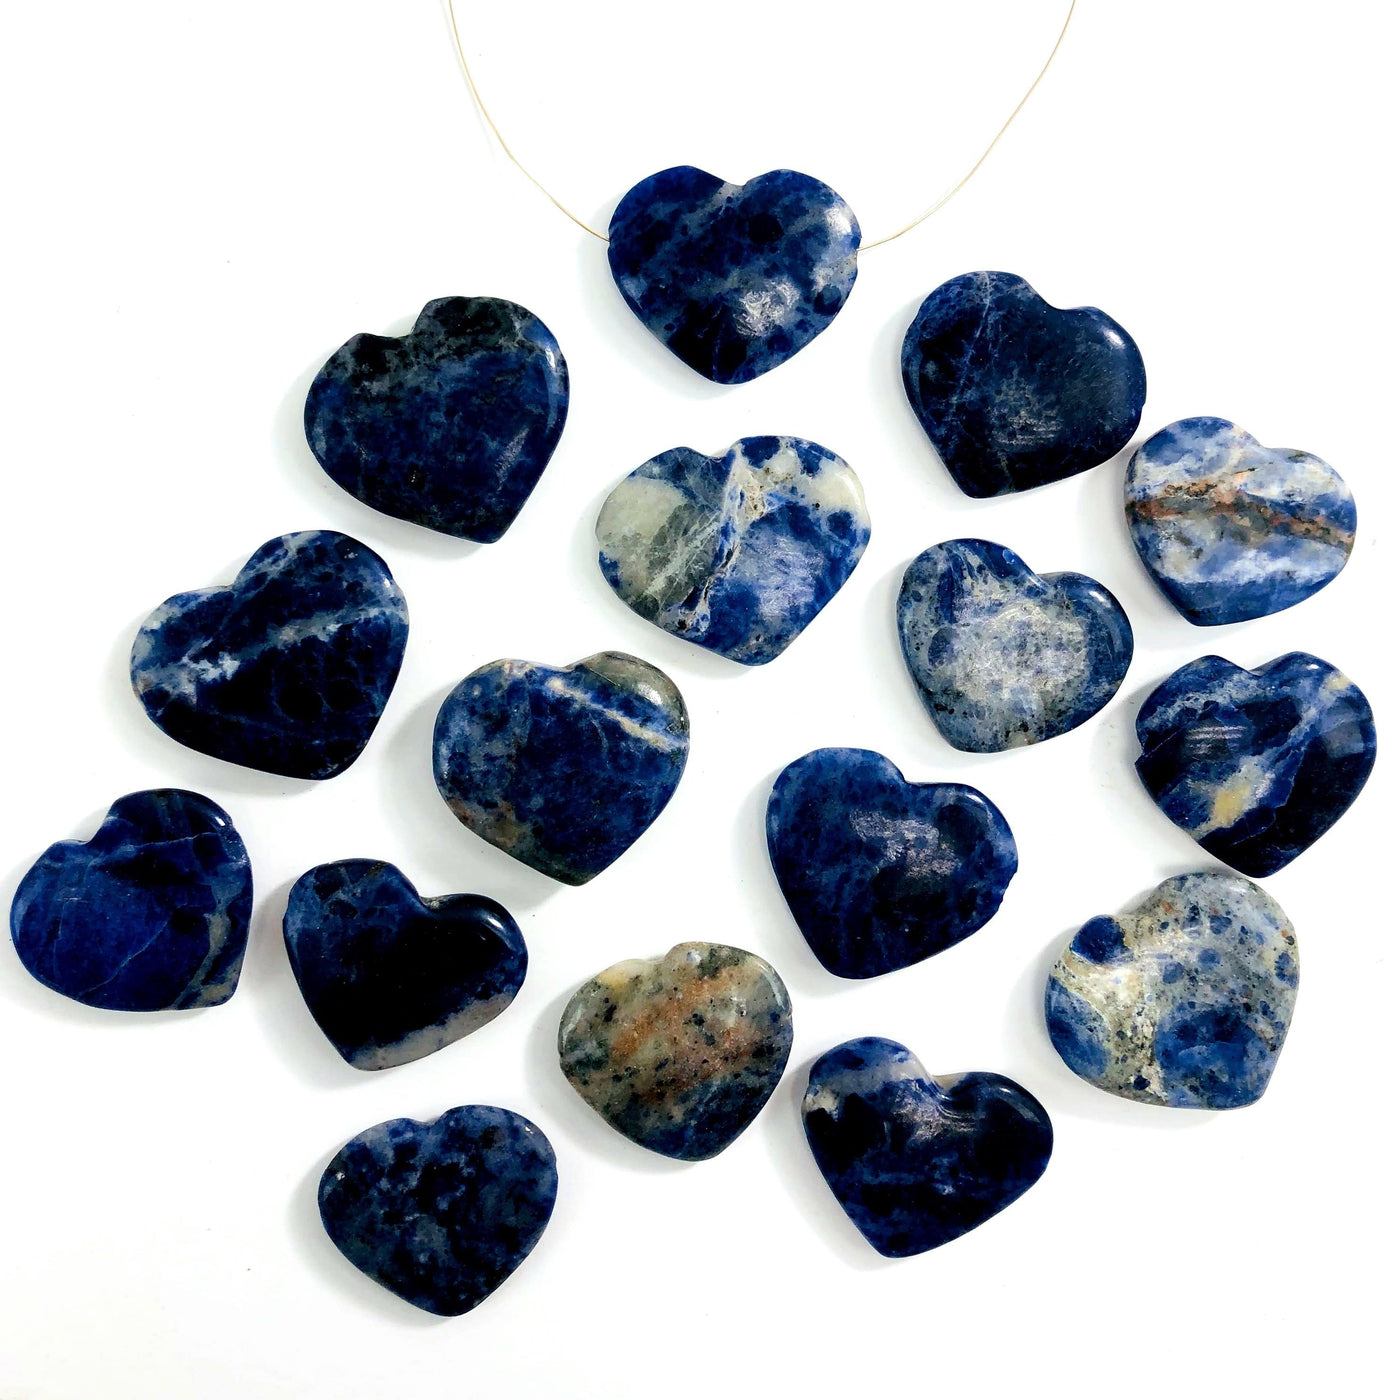 multiple sodalite head drilled heart shaped gemstones in a row one with a wire shown as a neckless